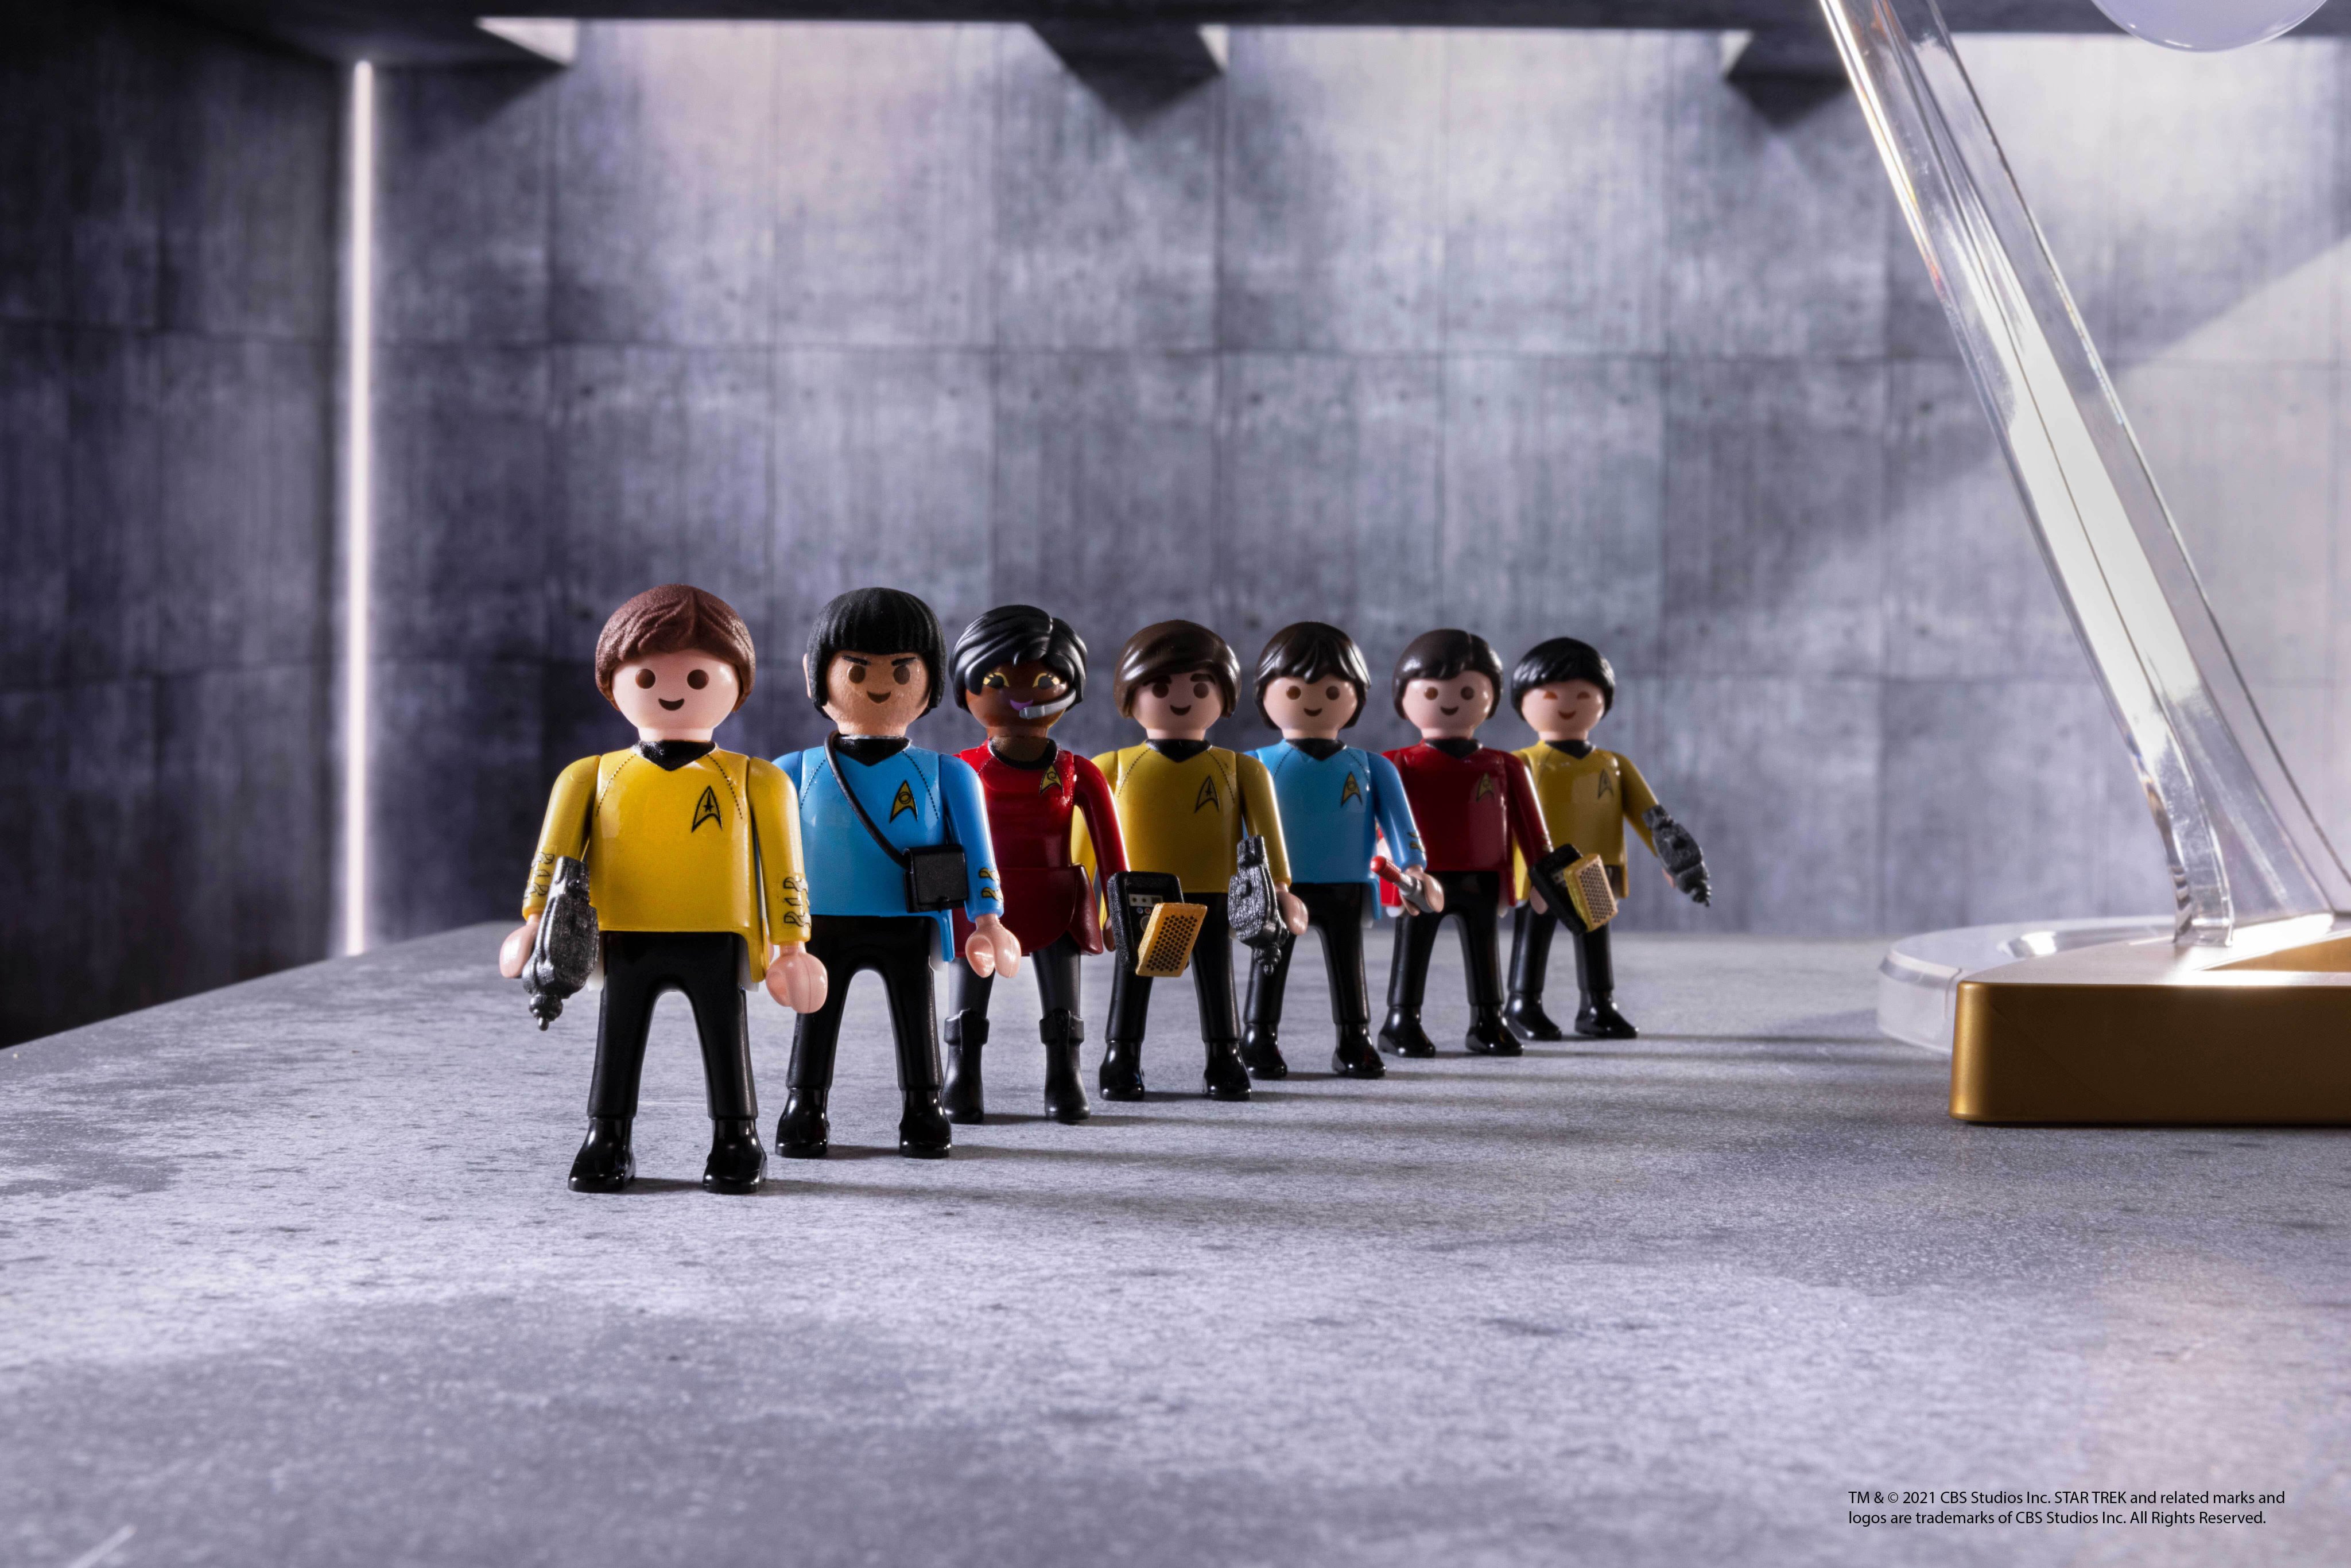 The Trek Collective: New images and details of the Playmobil USS Enterprise